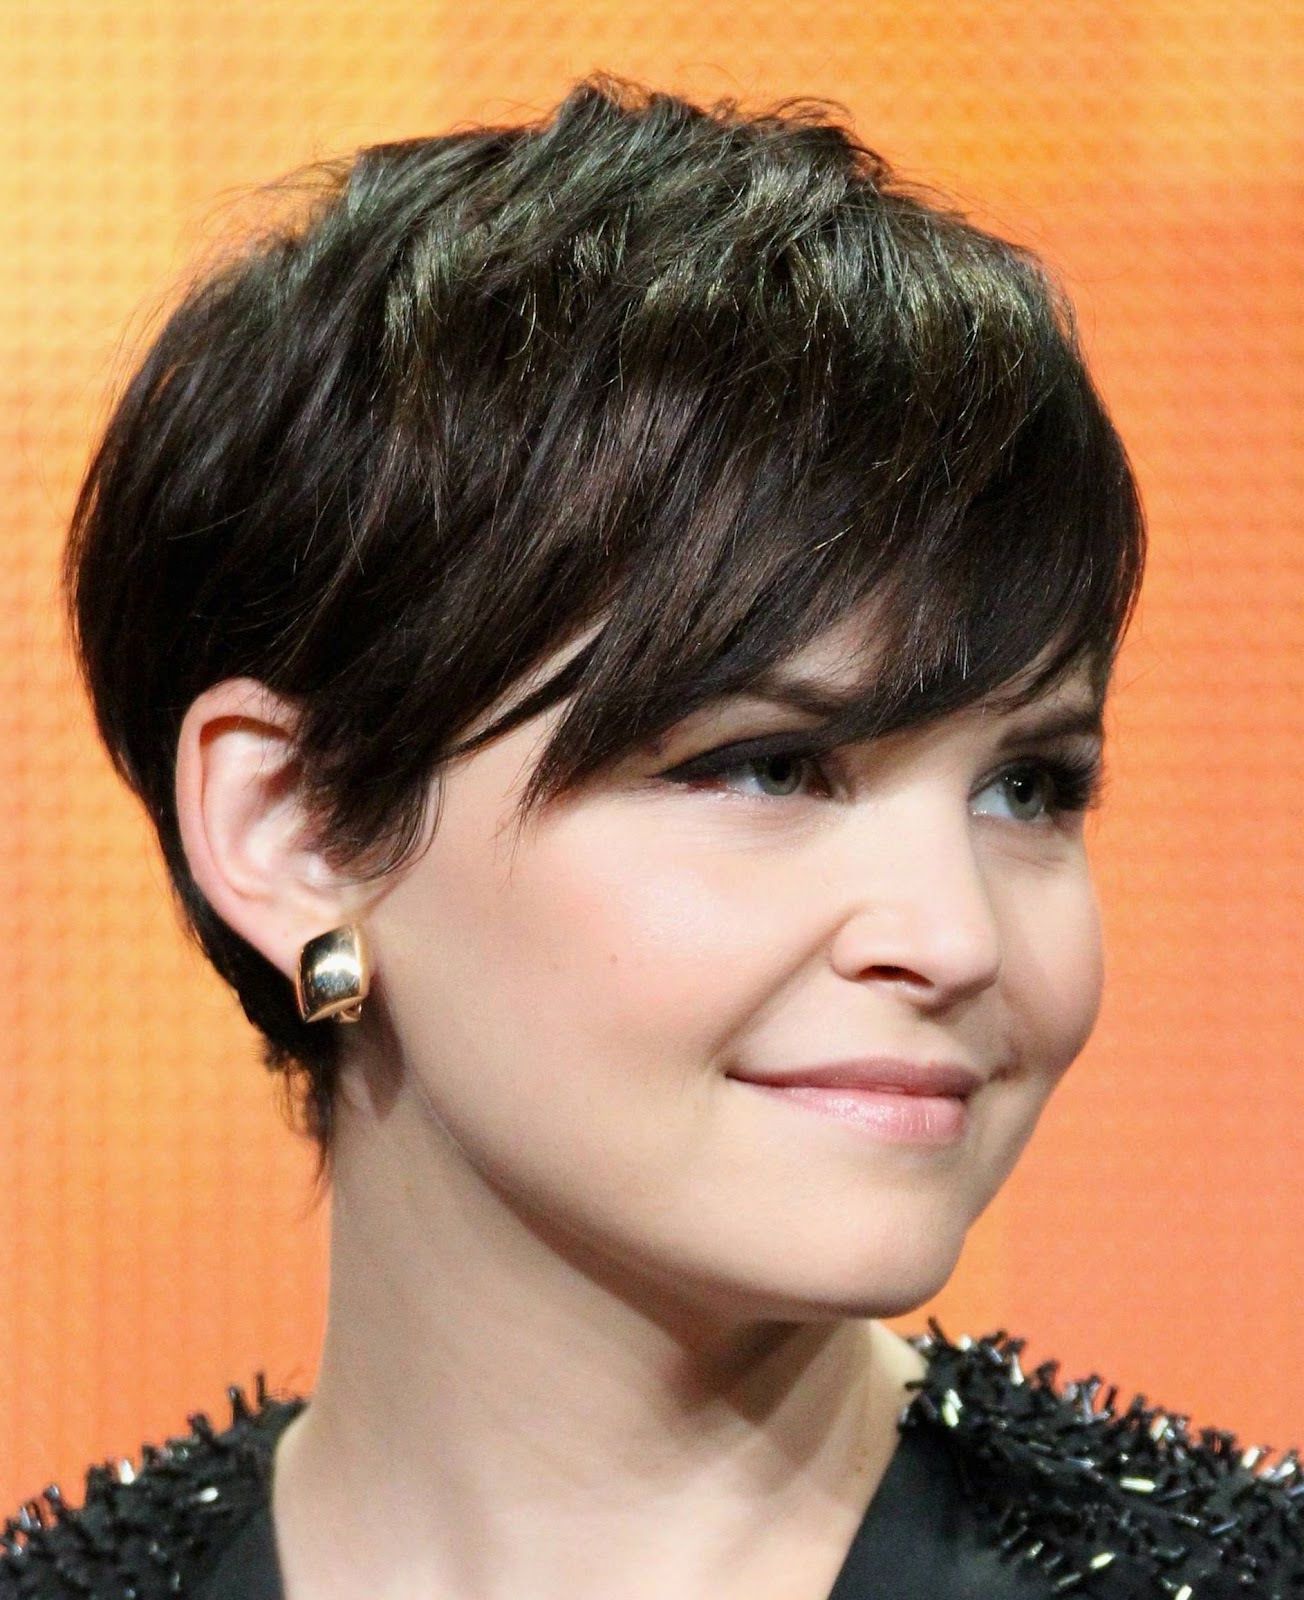 20 Stunning Looks With Pixie Cut For Round Face In 2018 | Haircuts With Regard To Edgy Short Hairstyles For Round Faces (View 11 of 25)